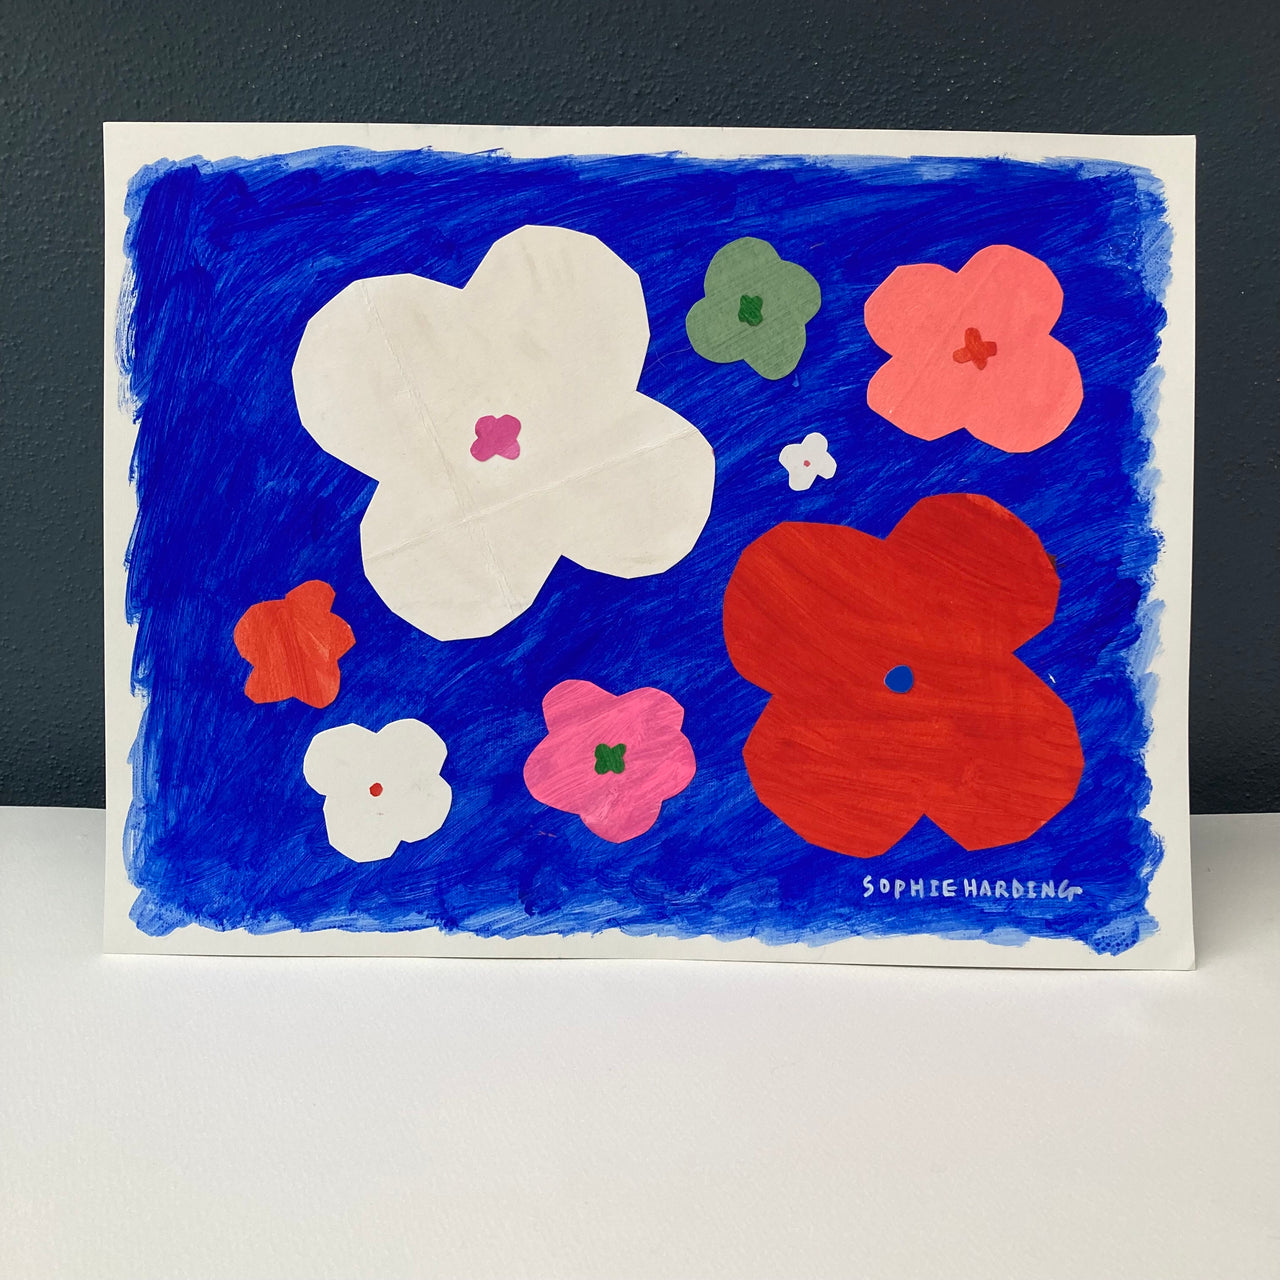 Cornish artist Sophie Harding, white, pink red and green flowers on blue background.